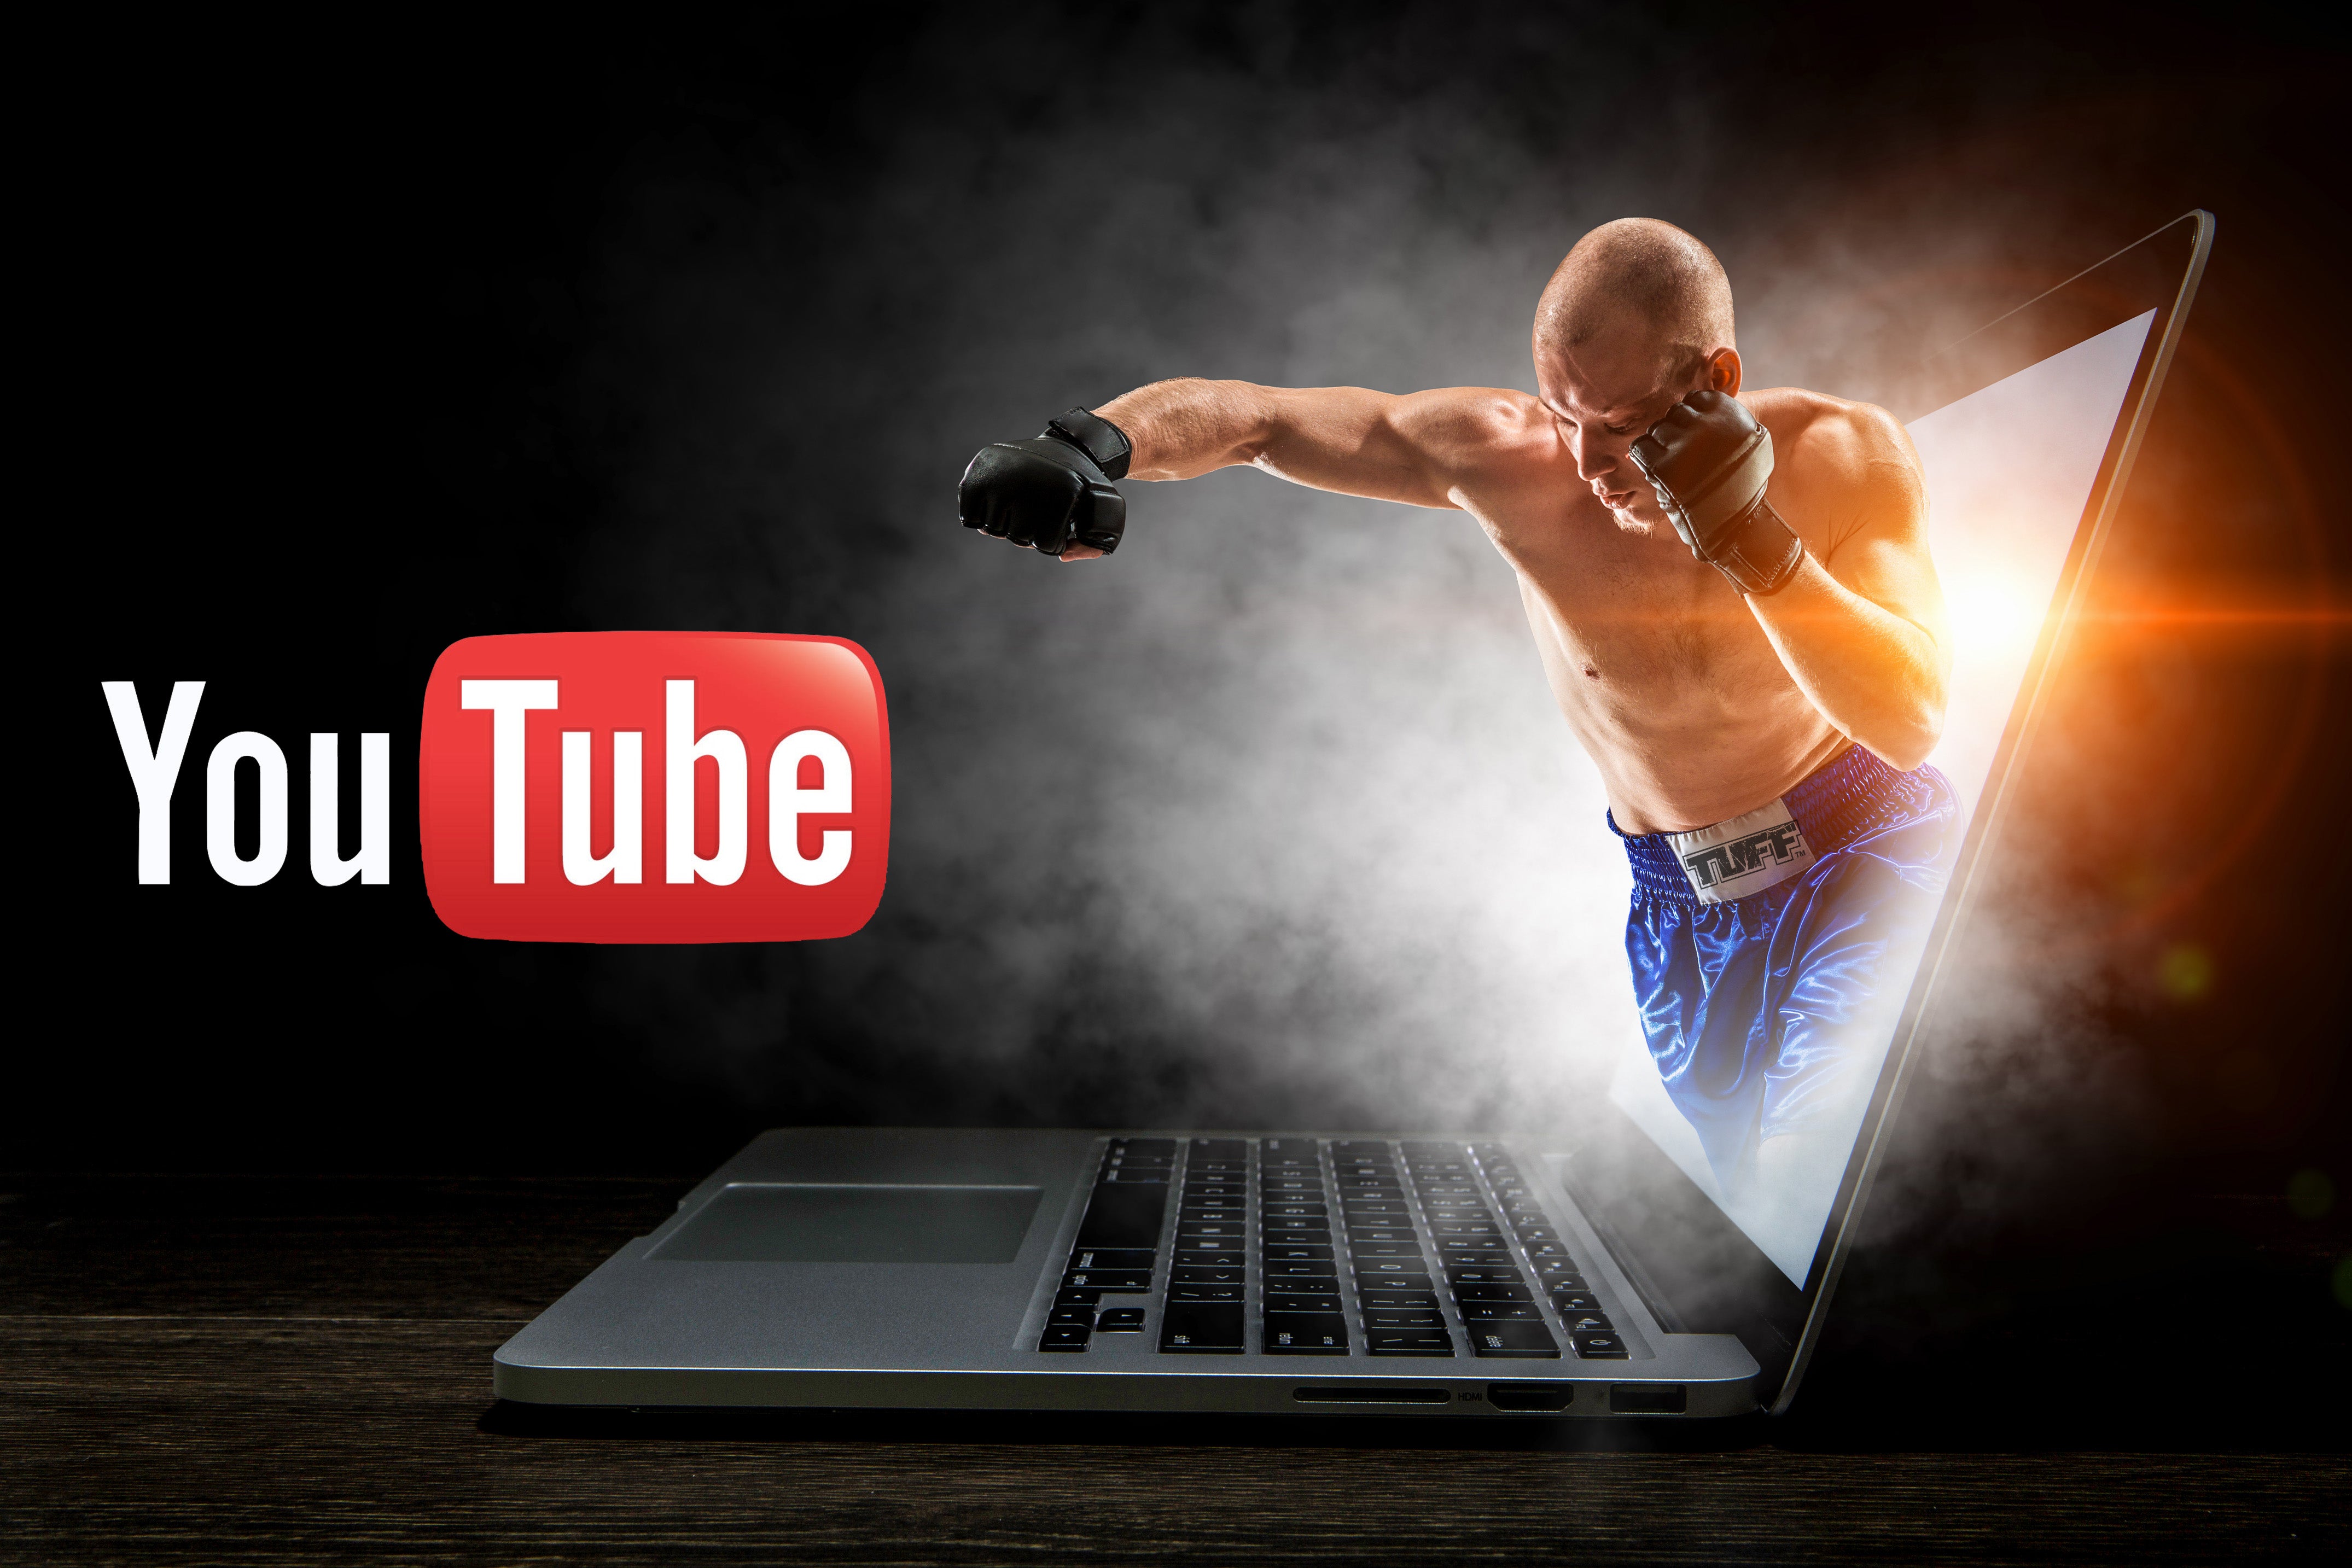 Can we learn Muay Thai from YouTube?